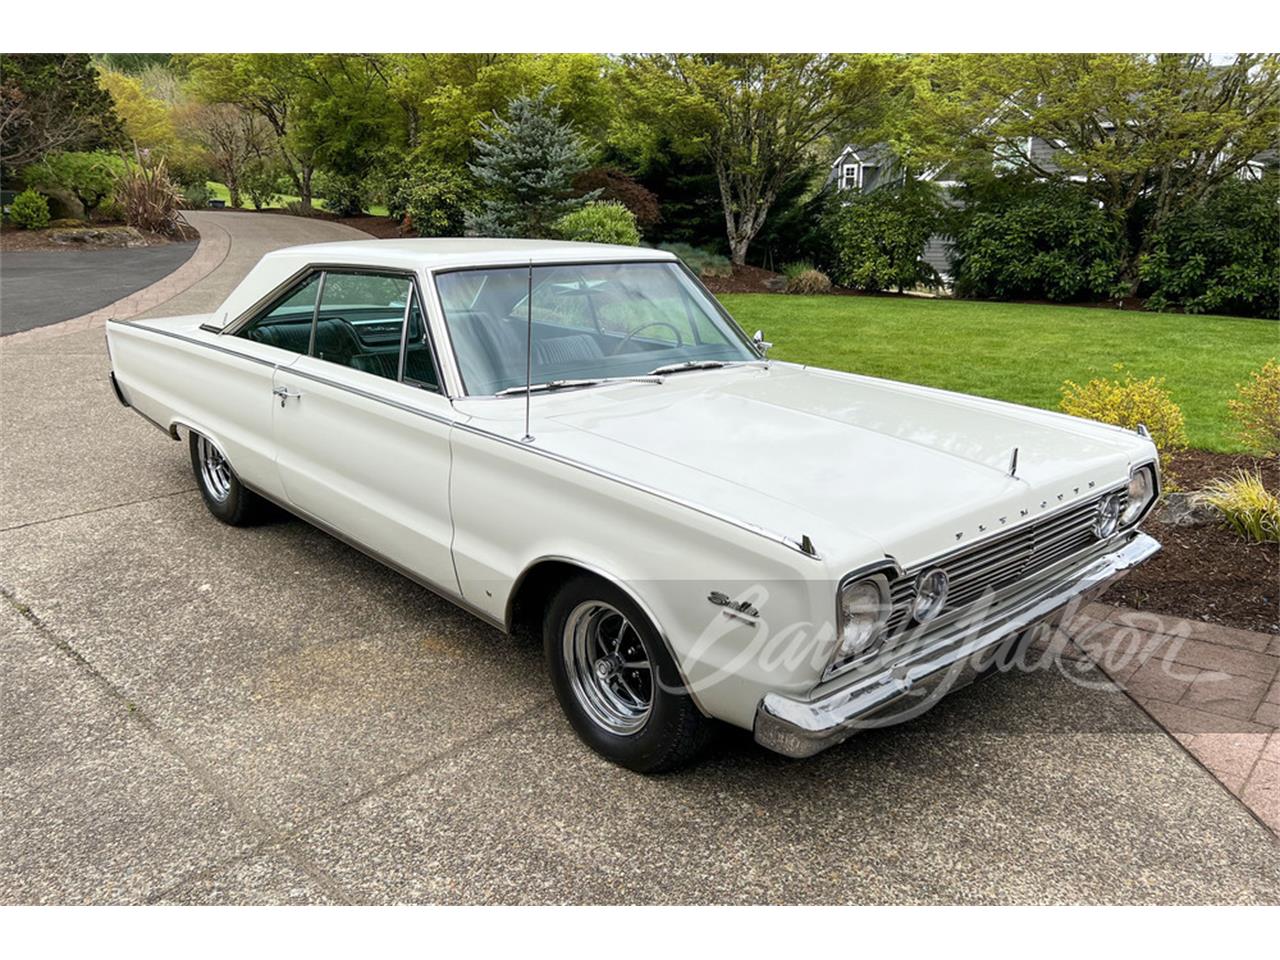 For Sale at Auction: 1966 Plymouth Satellite in Scottsdale, Arizona for sale in Scottsdale, AZ